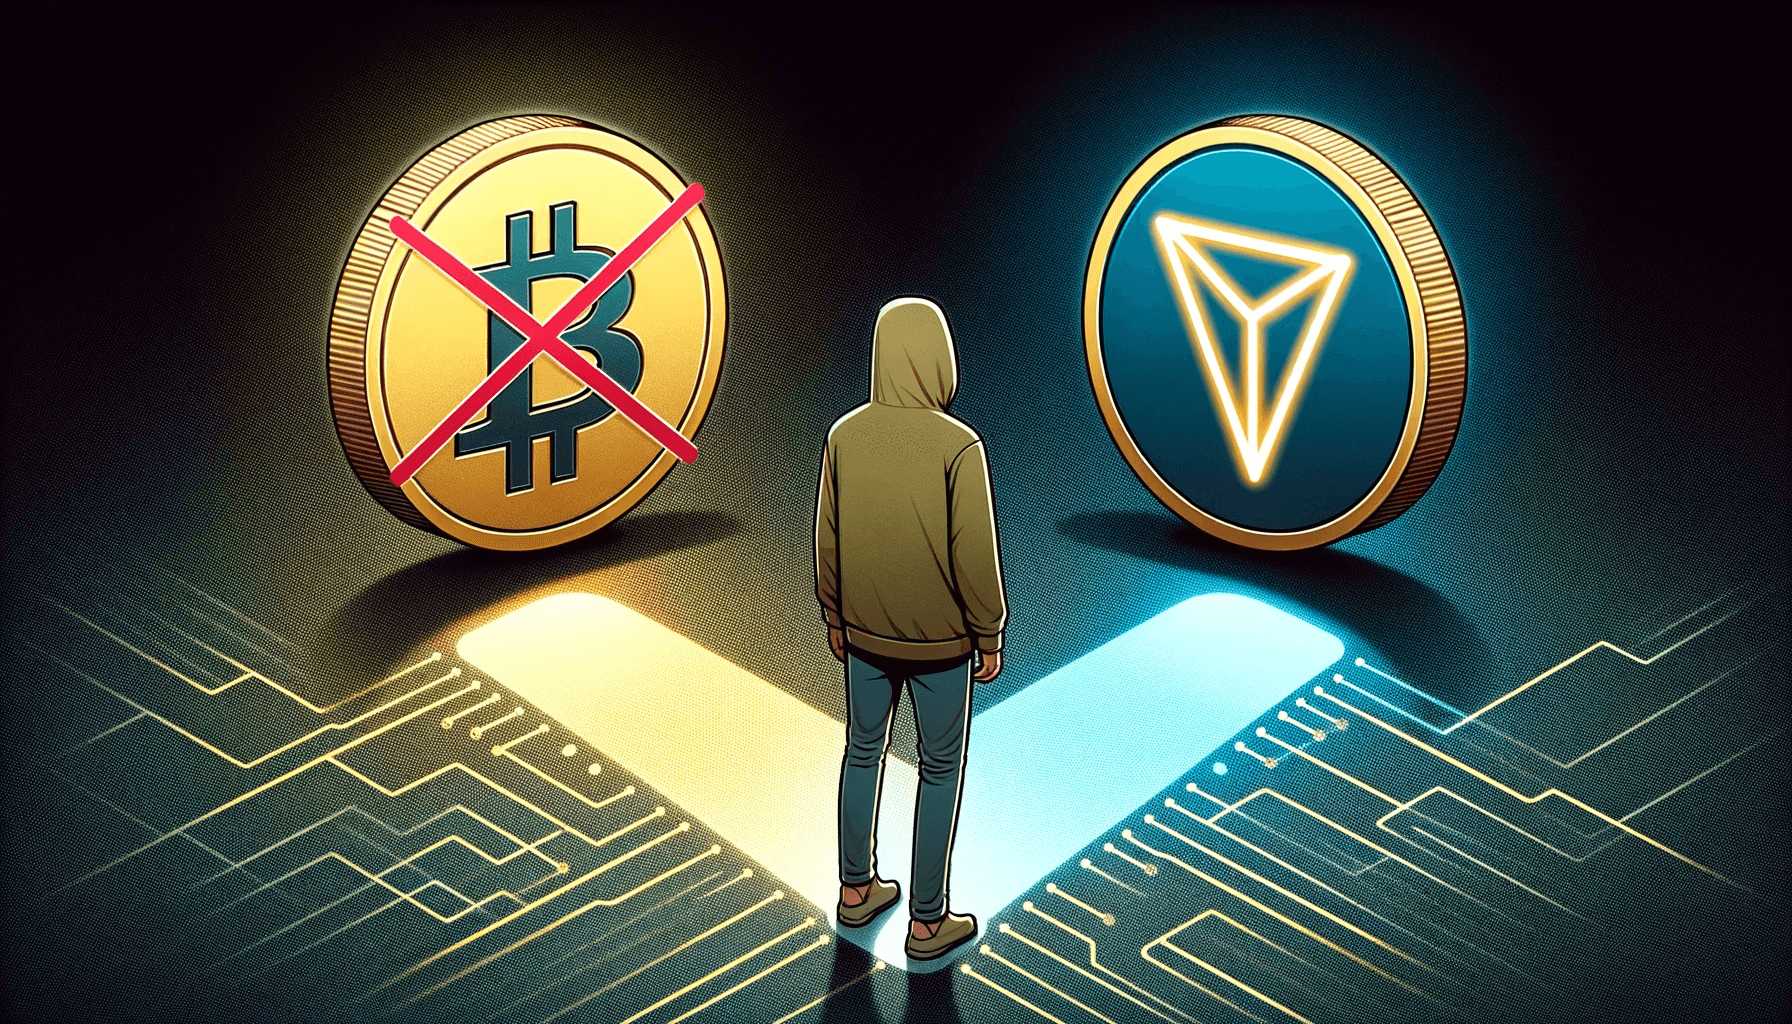 Reuters: Terrorist Groups Shift to Tron Over Bitcoin